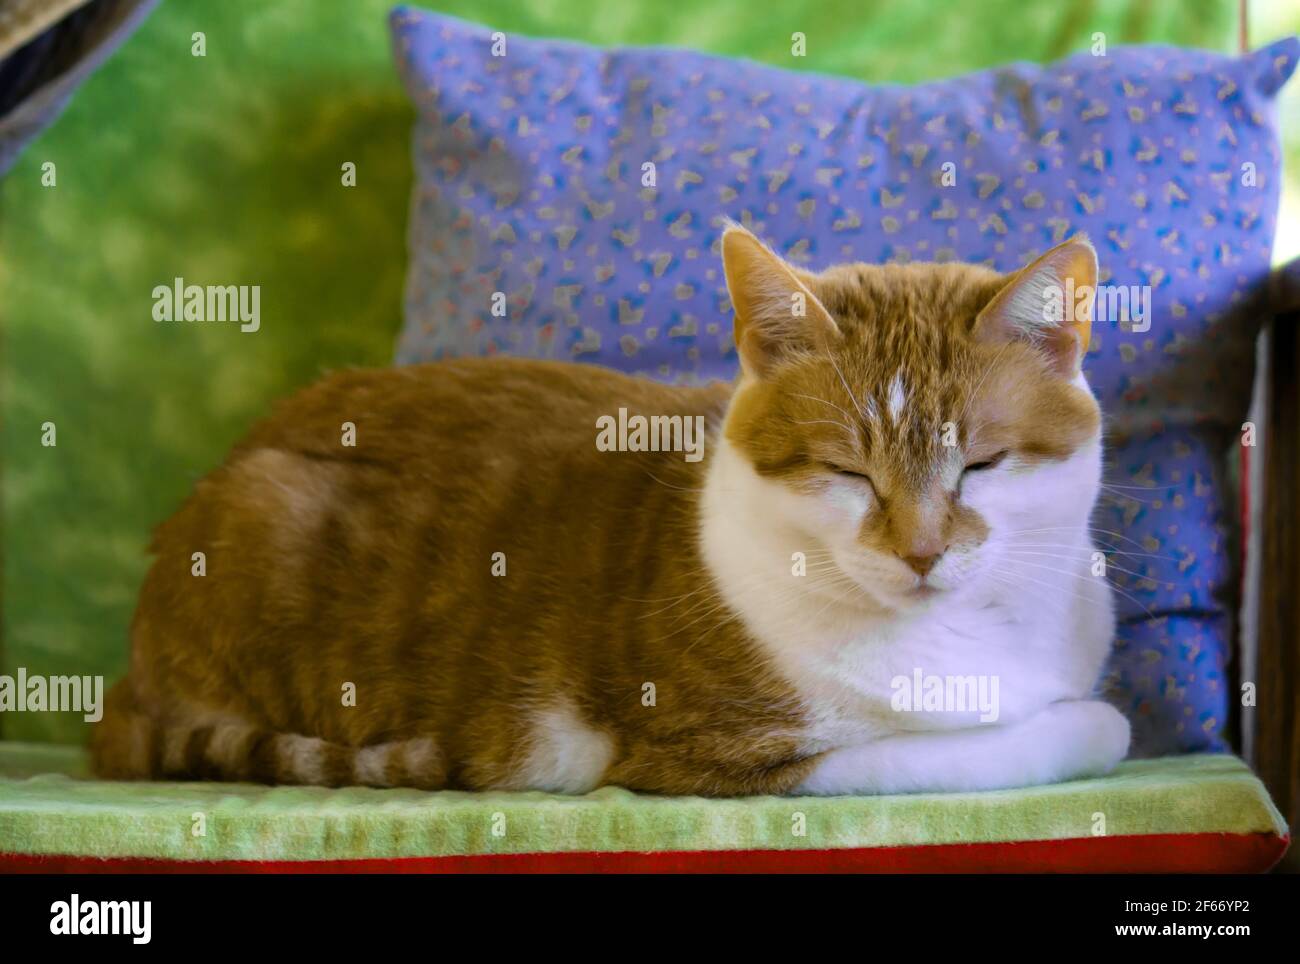 Domestic Ginger Cat Sleeping on a warm summaer's afternoon. Stock Photo